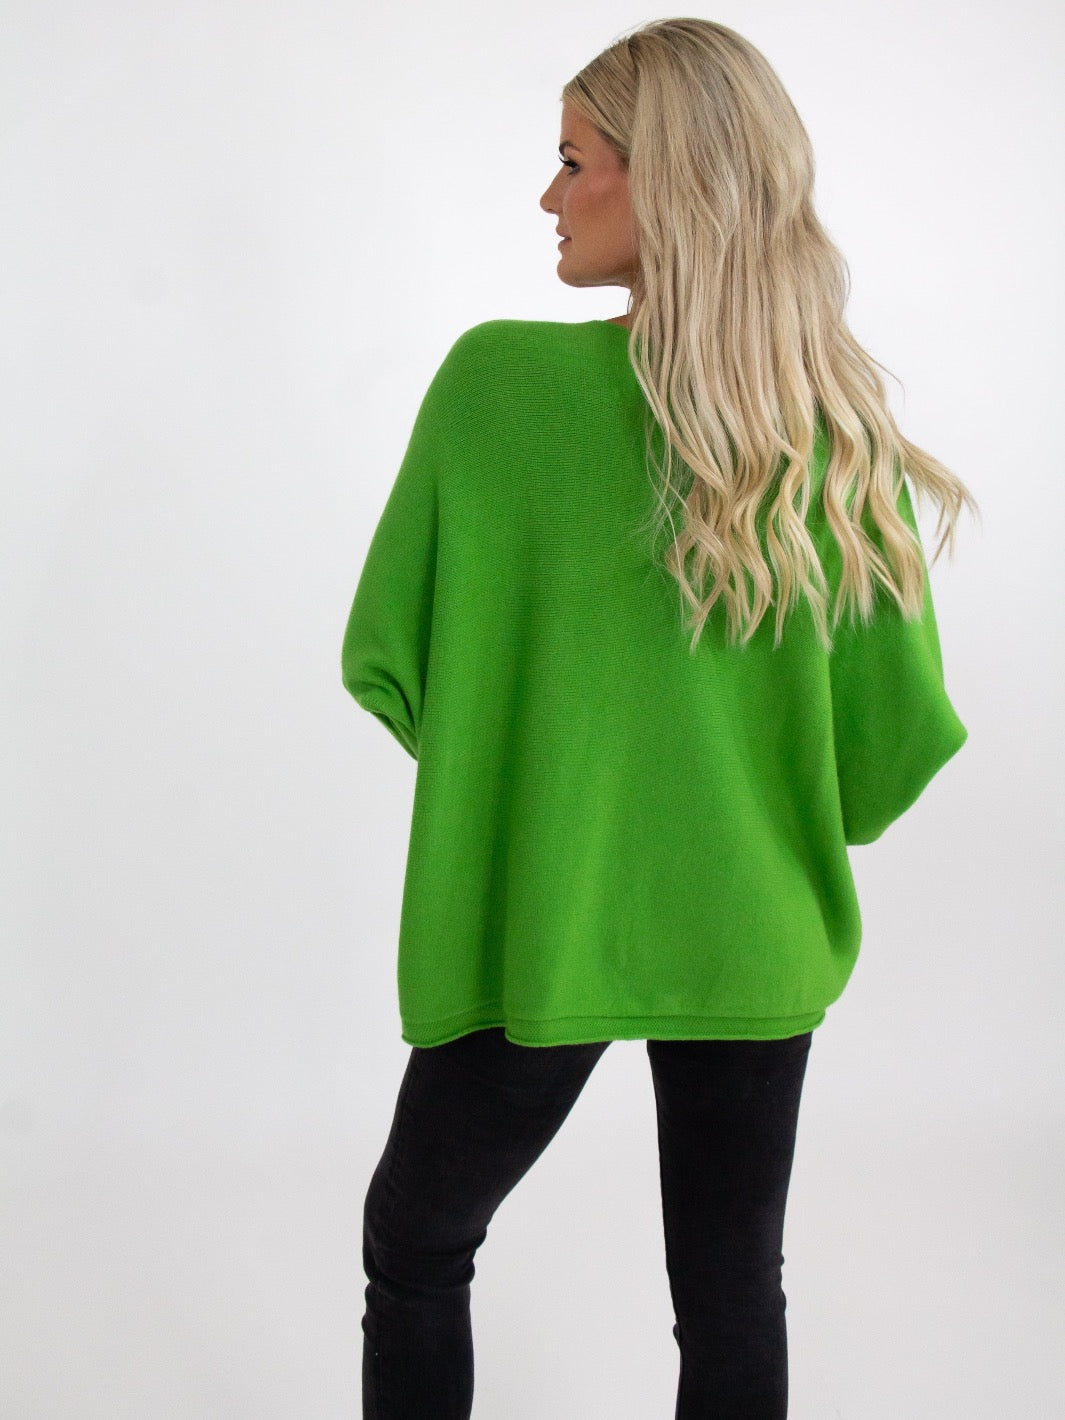 Kate & Pippa Roma Knit Jumper In Lime Green-Kate & Pippa